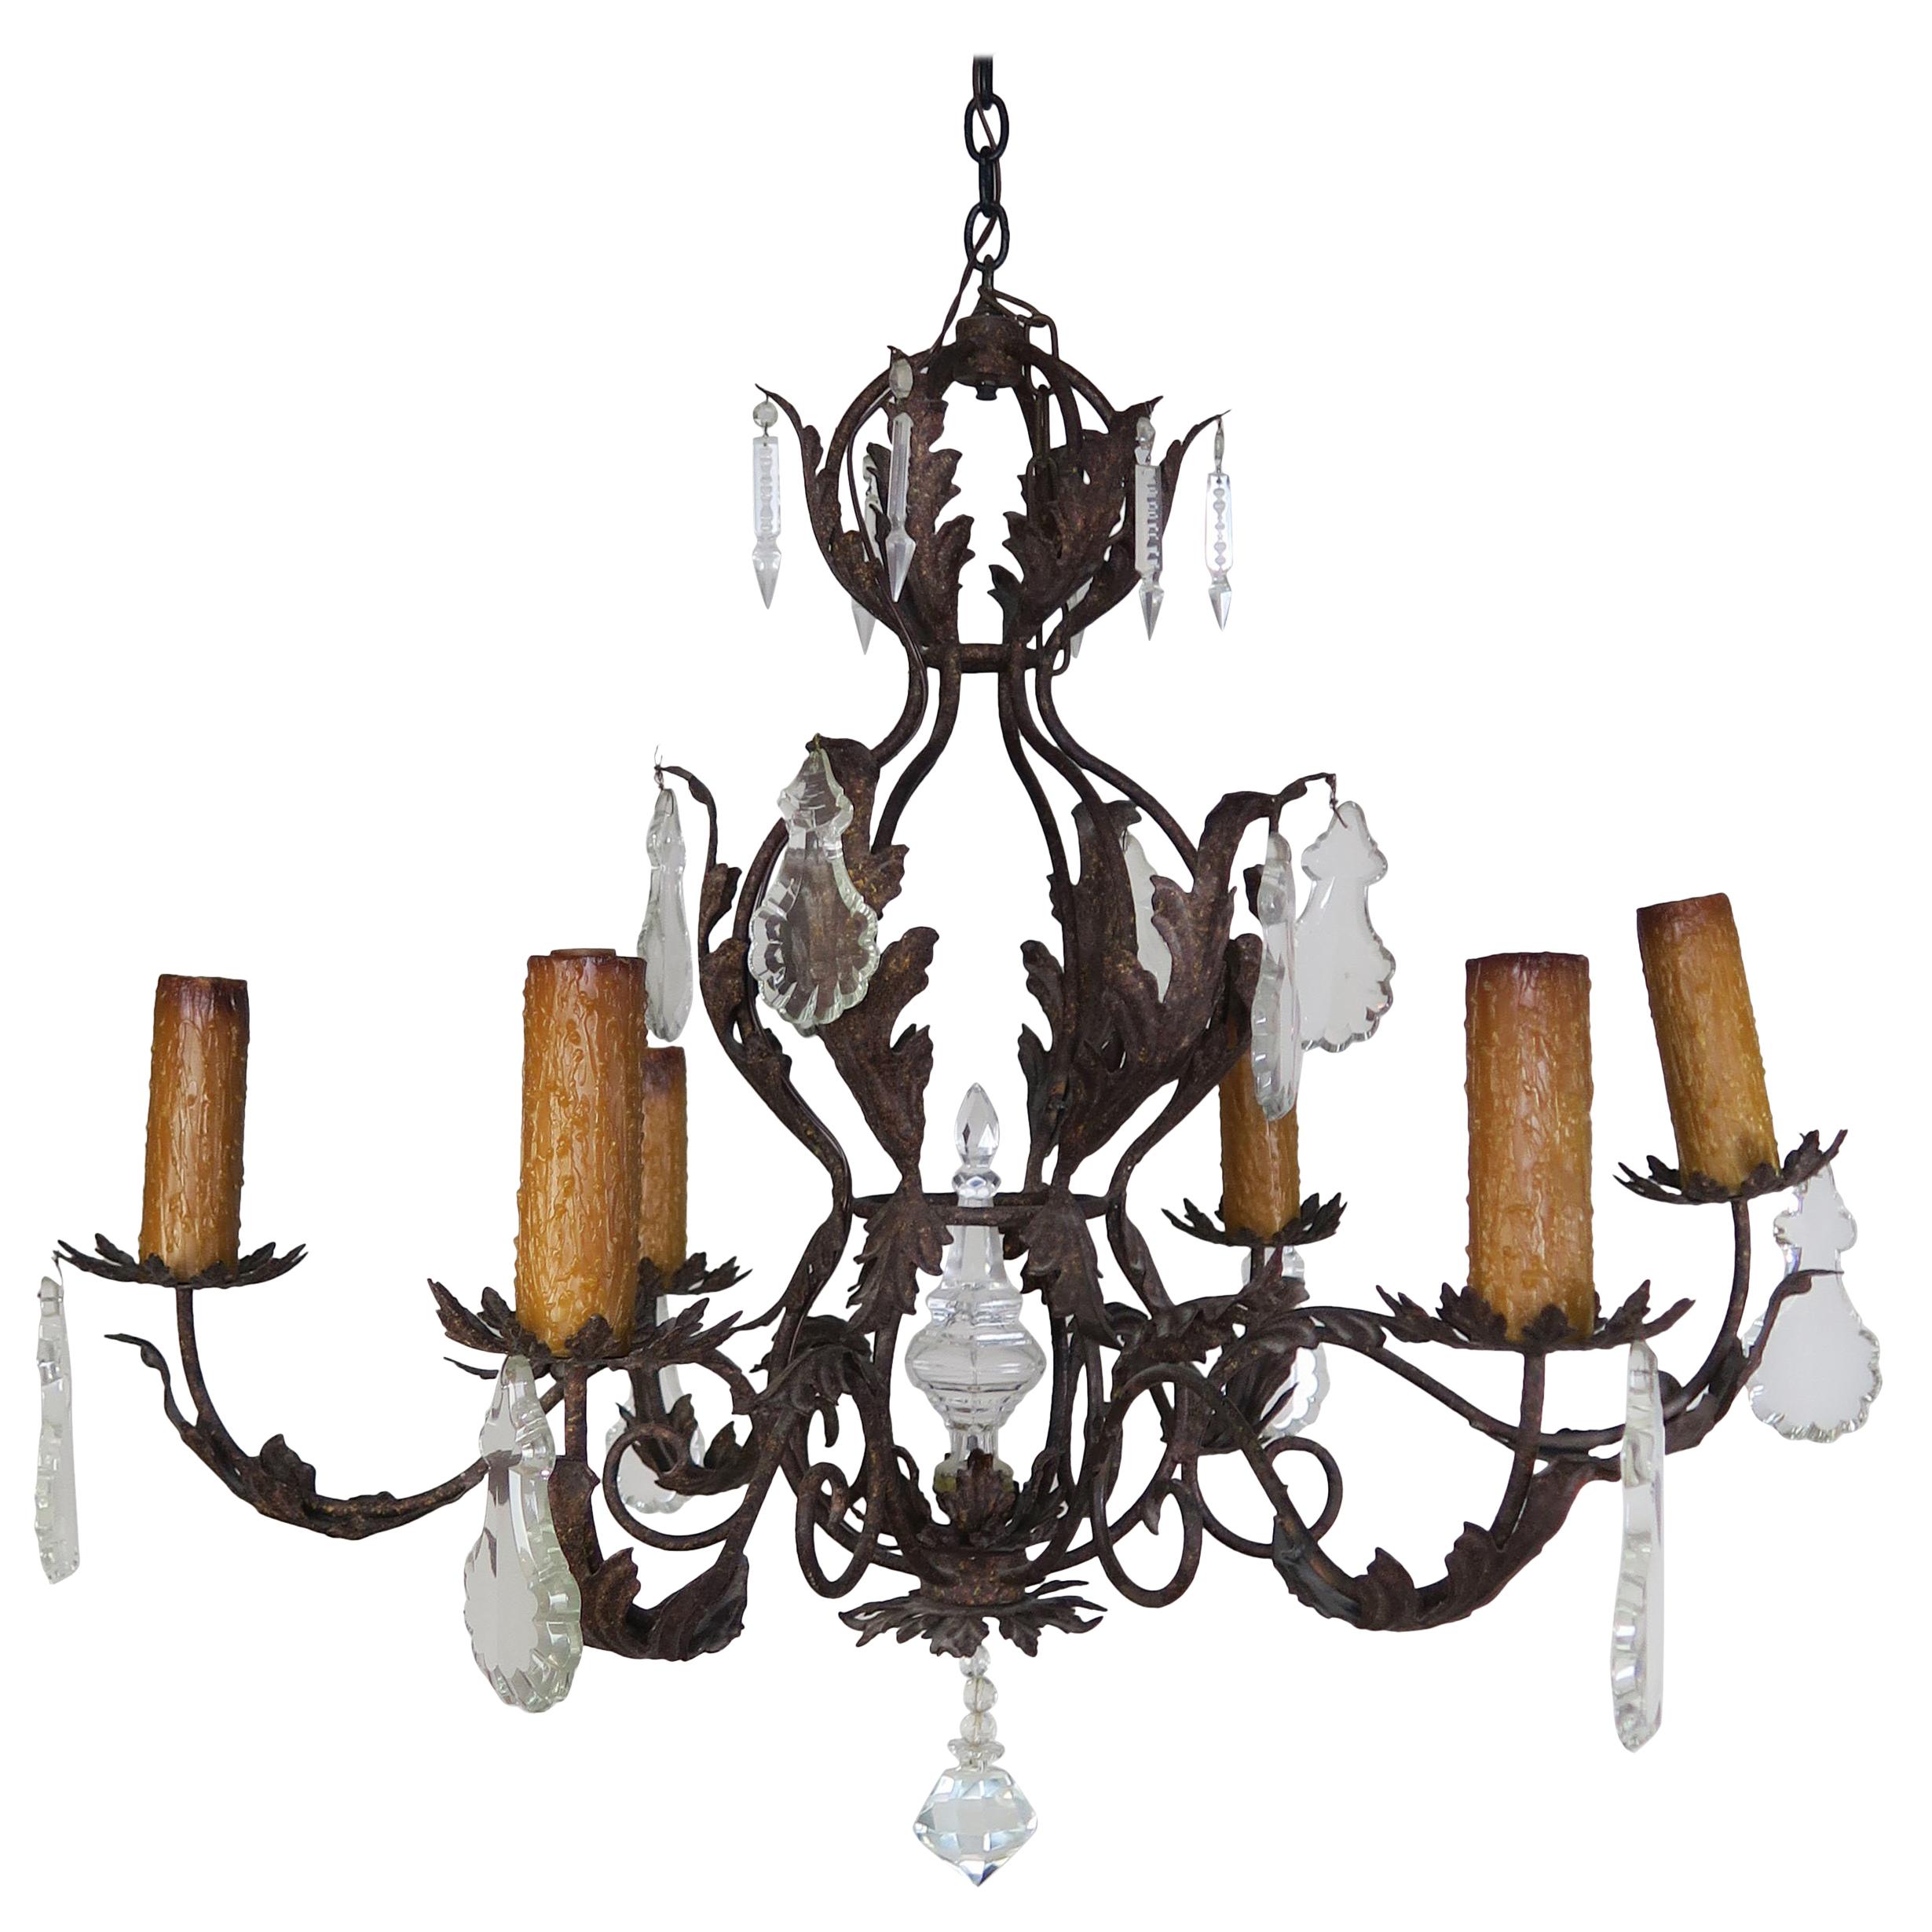 Six Light Spanish Style Wrought Iron Chandelier with Crystal Drops